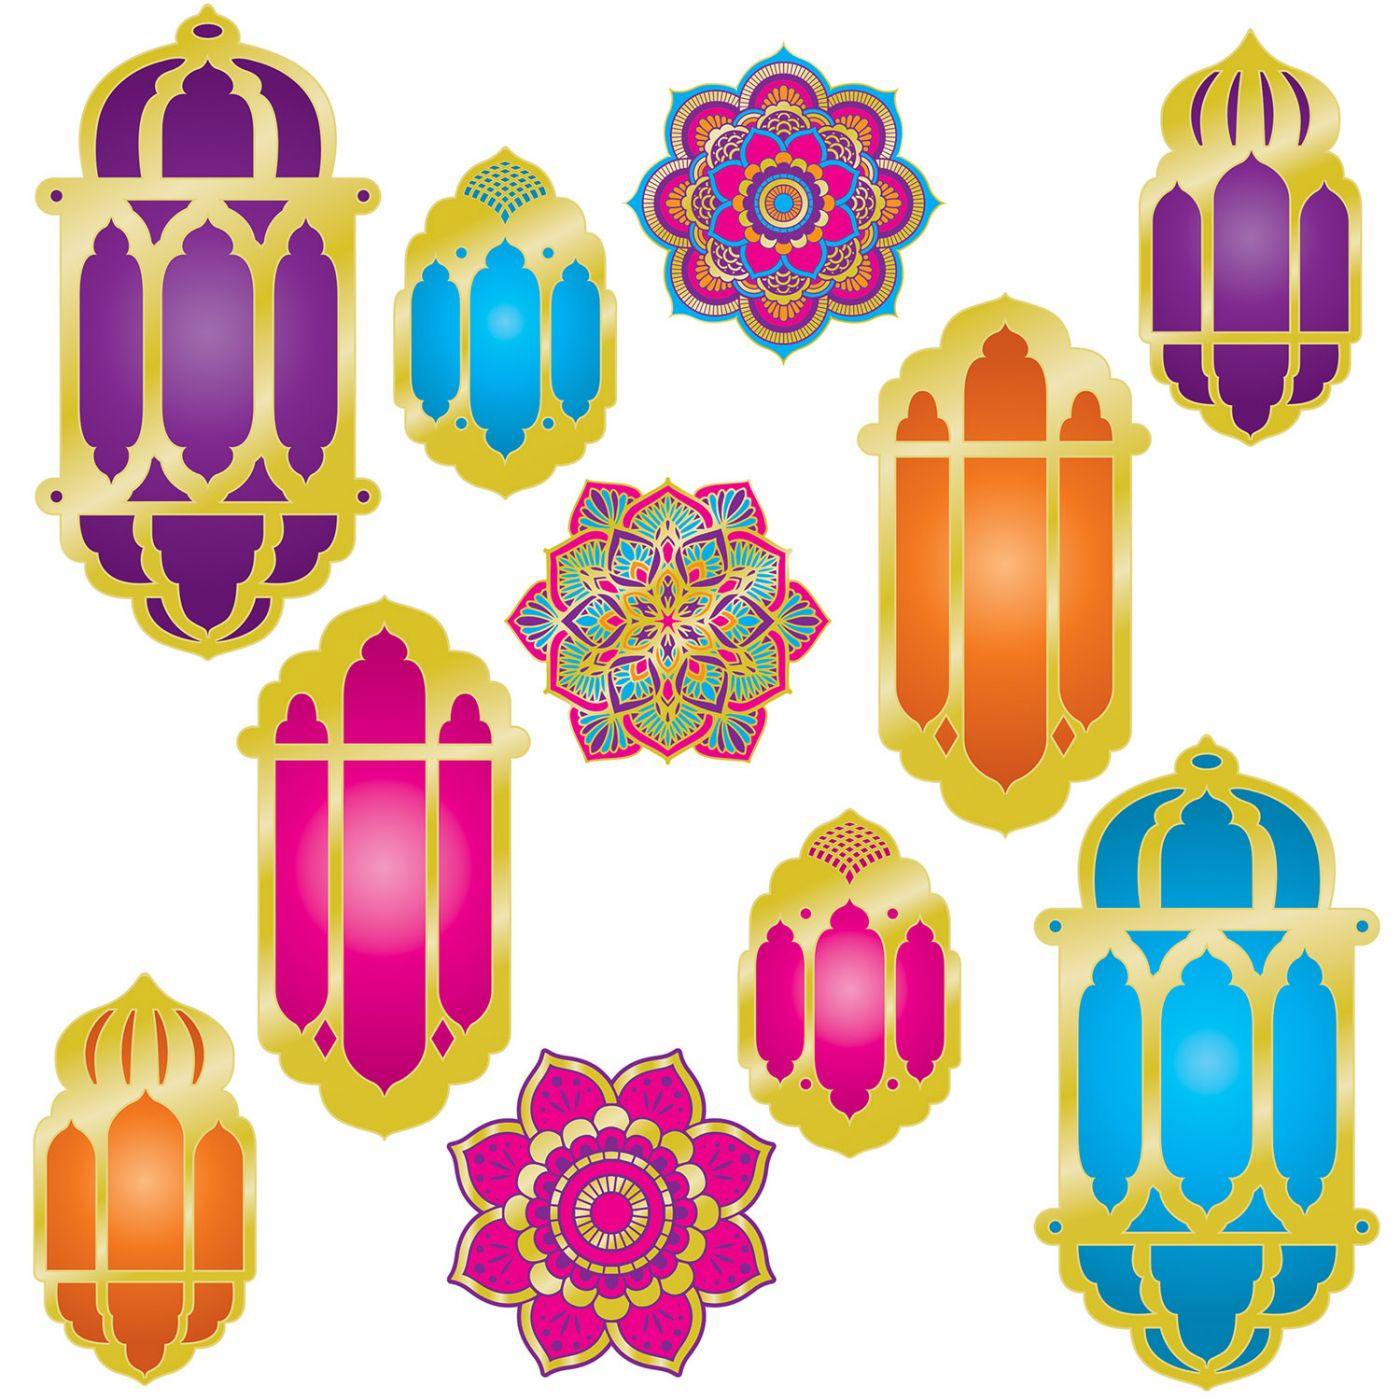 Arabian Nights 11pc Foil Lantern and Mandala cutout decorations pack by Beistle 53580 available here at Karnival Costumes online party shop